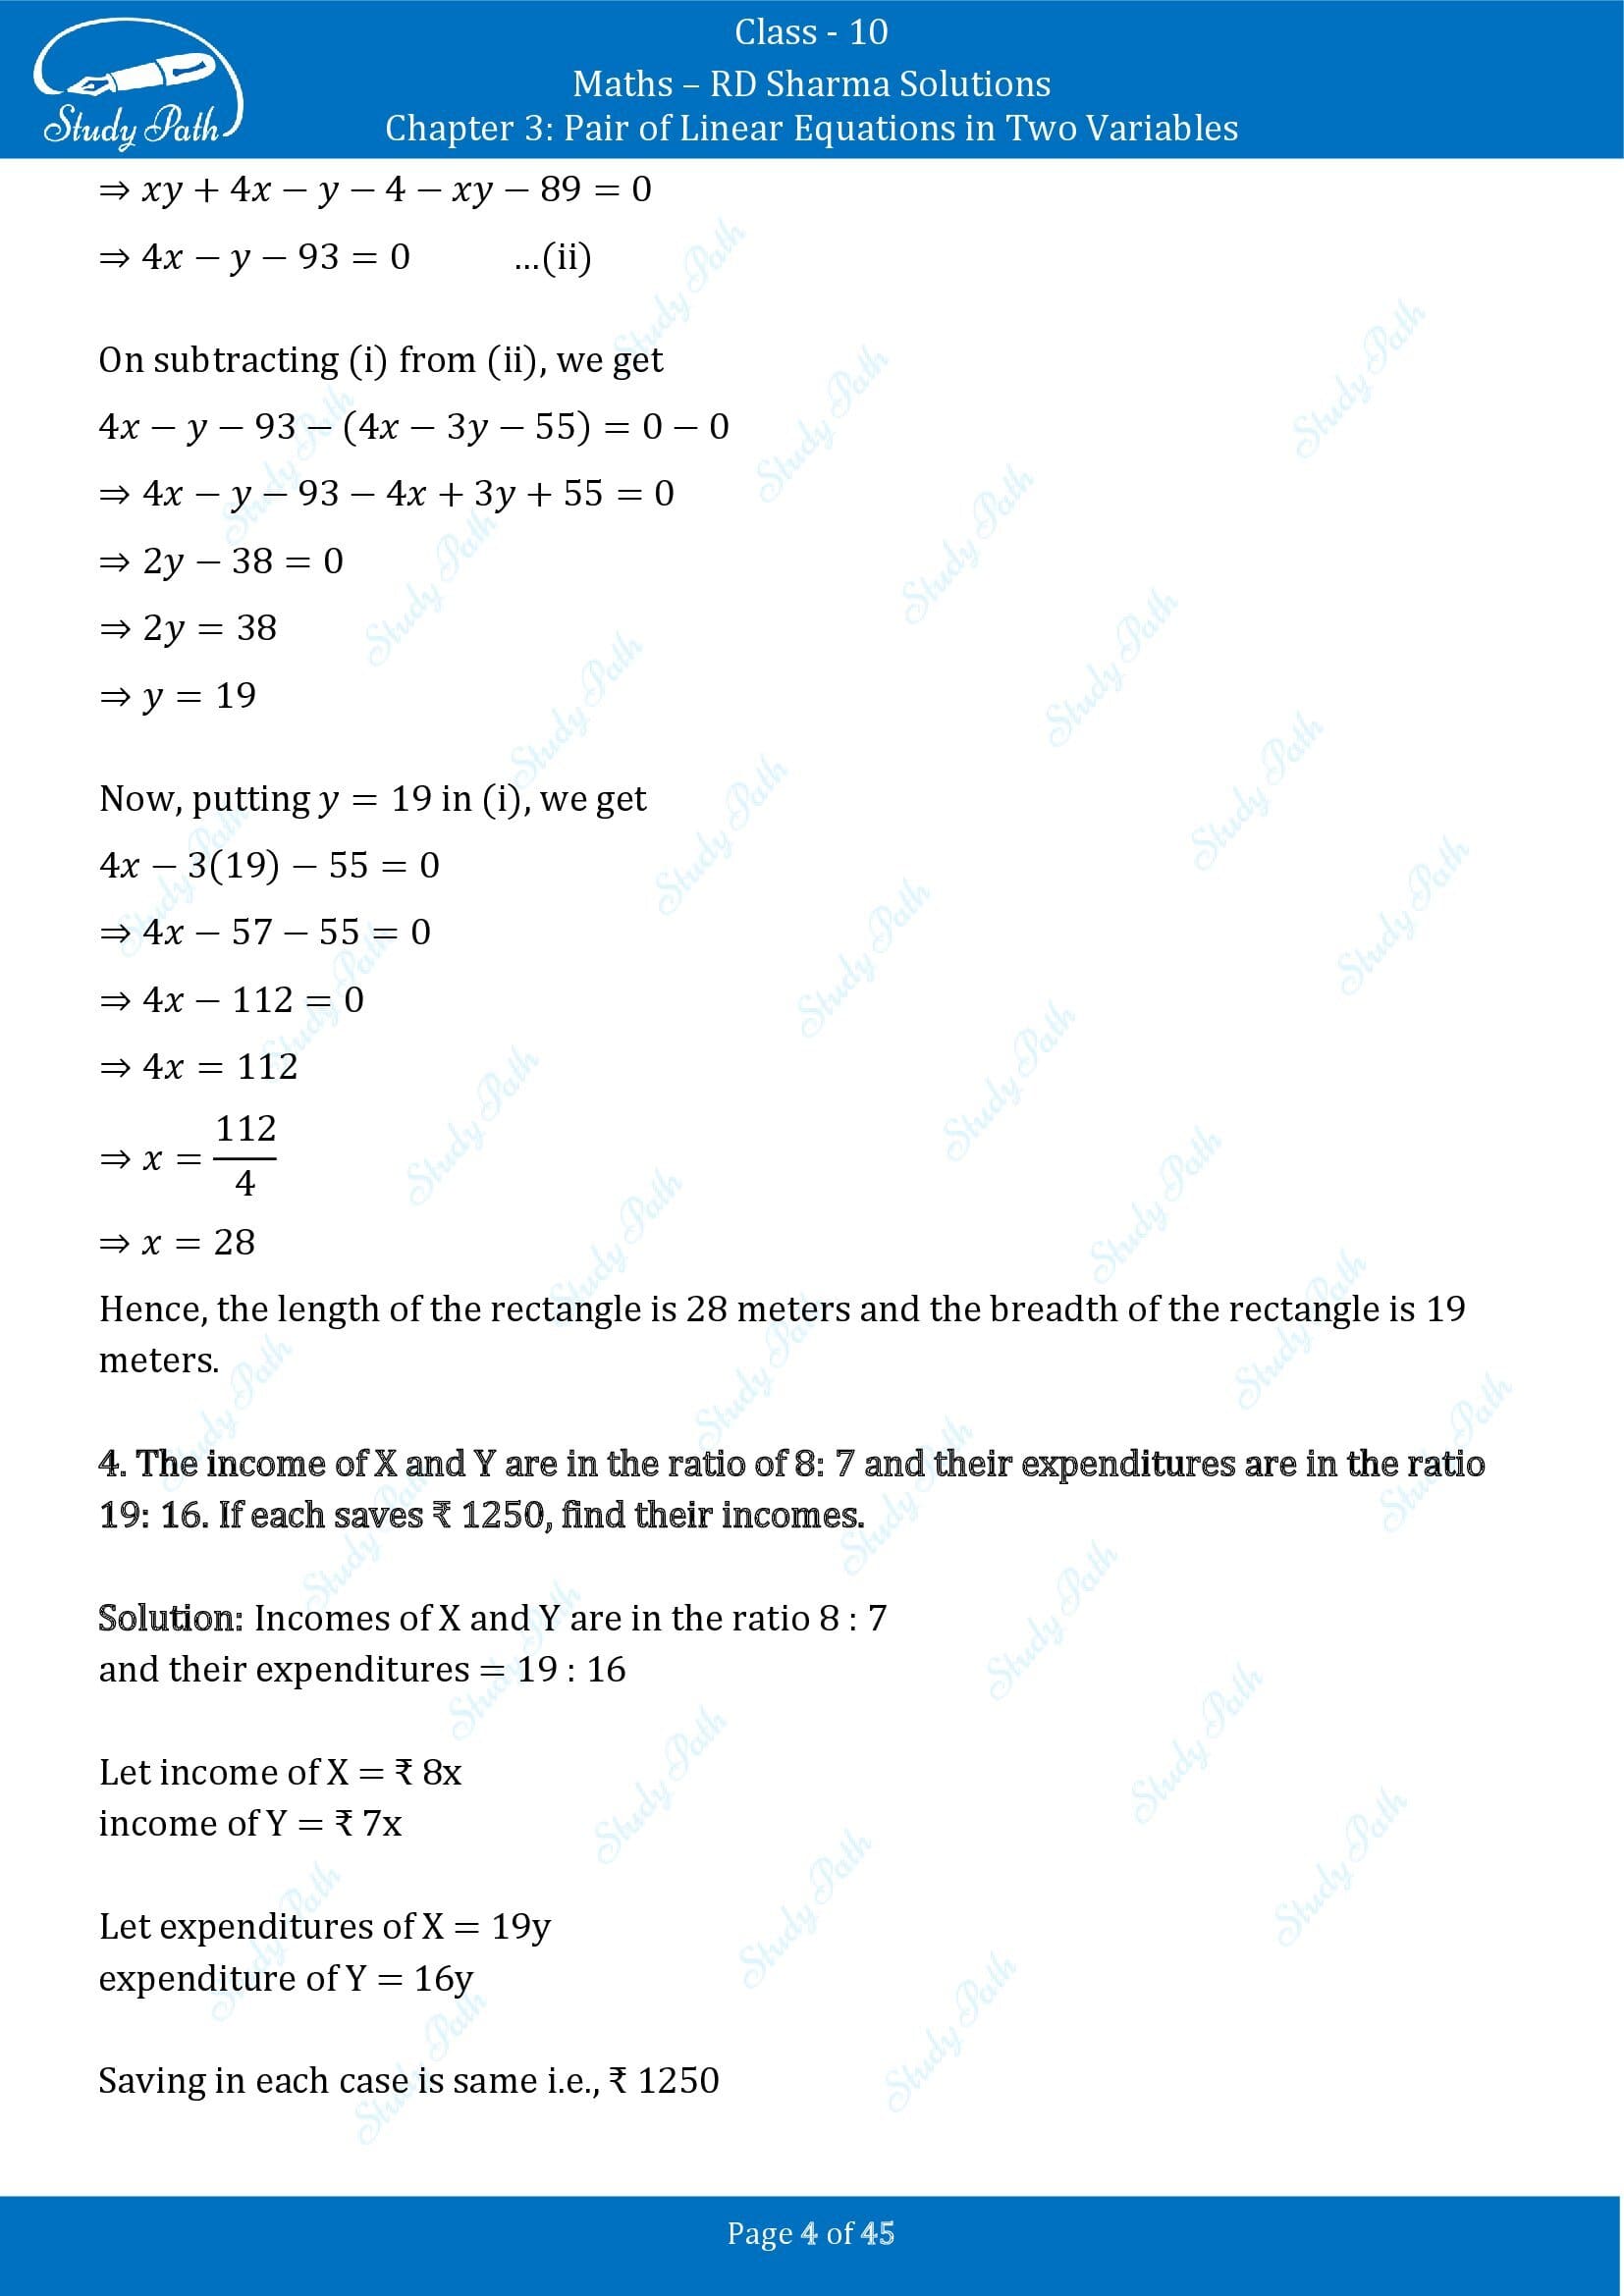 RD Sharma Solutions Class 10 Chapter 3 Pair of Linear Equations in Two Variables Exercise 3.11 00004